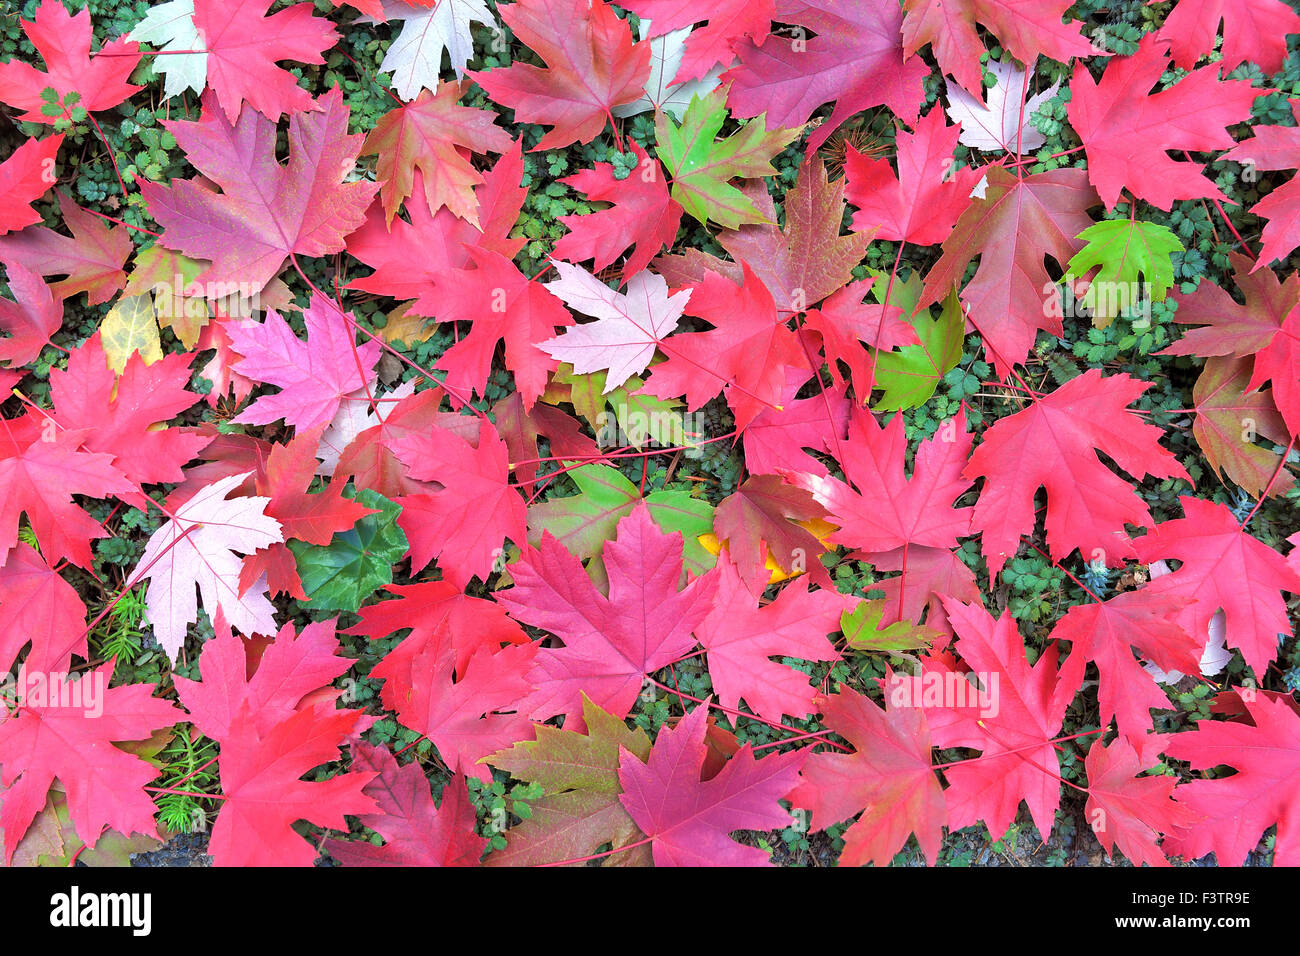 Maple Leaves in Changing Fall Season Colors on New Zealand Burr Ground Cover Background Illustration Stock Photo